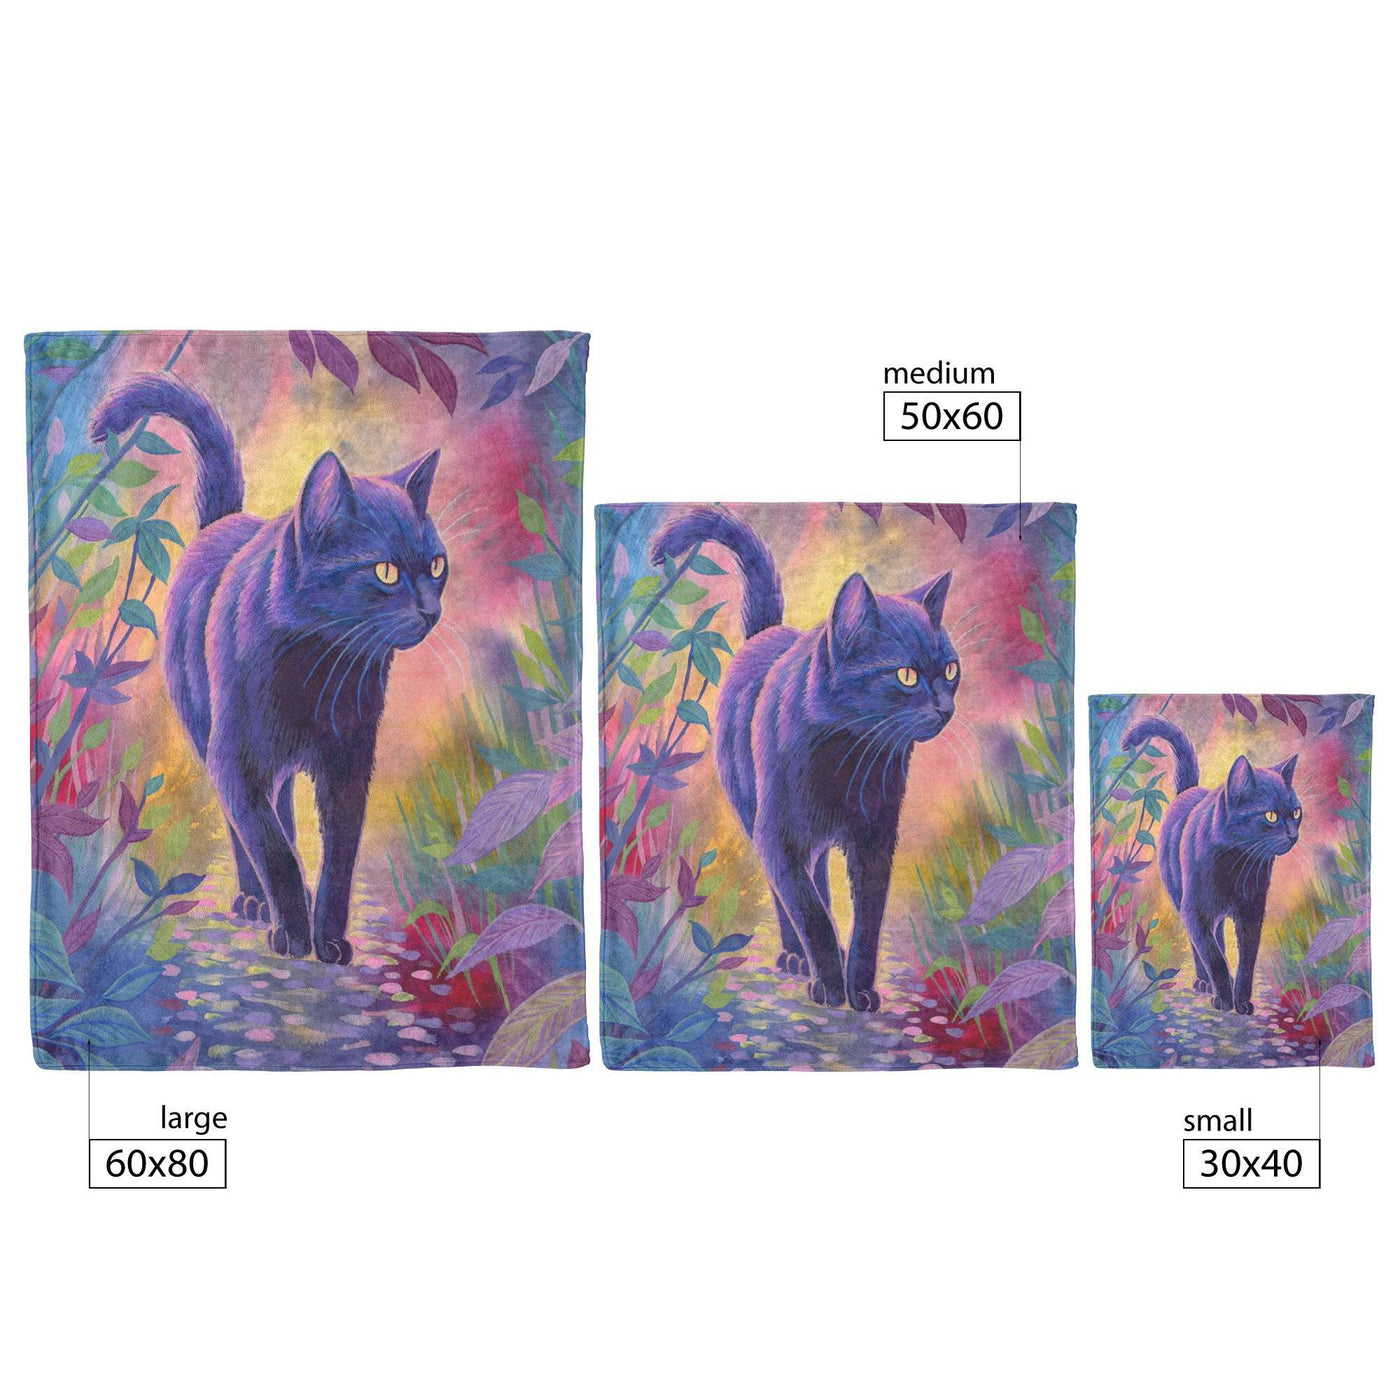 Three images of a Cat Blanket with a black cat walking through a colorful, leafy landscape in different sizes: large, medium, and small.